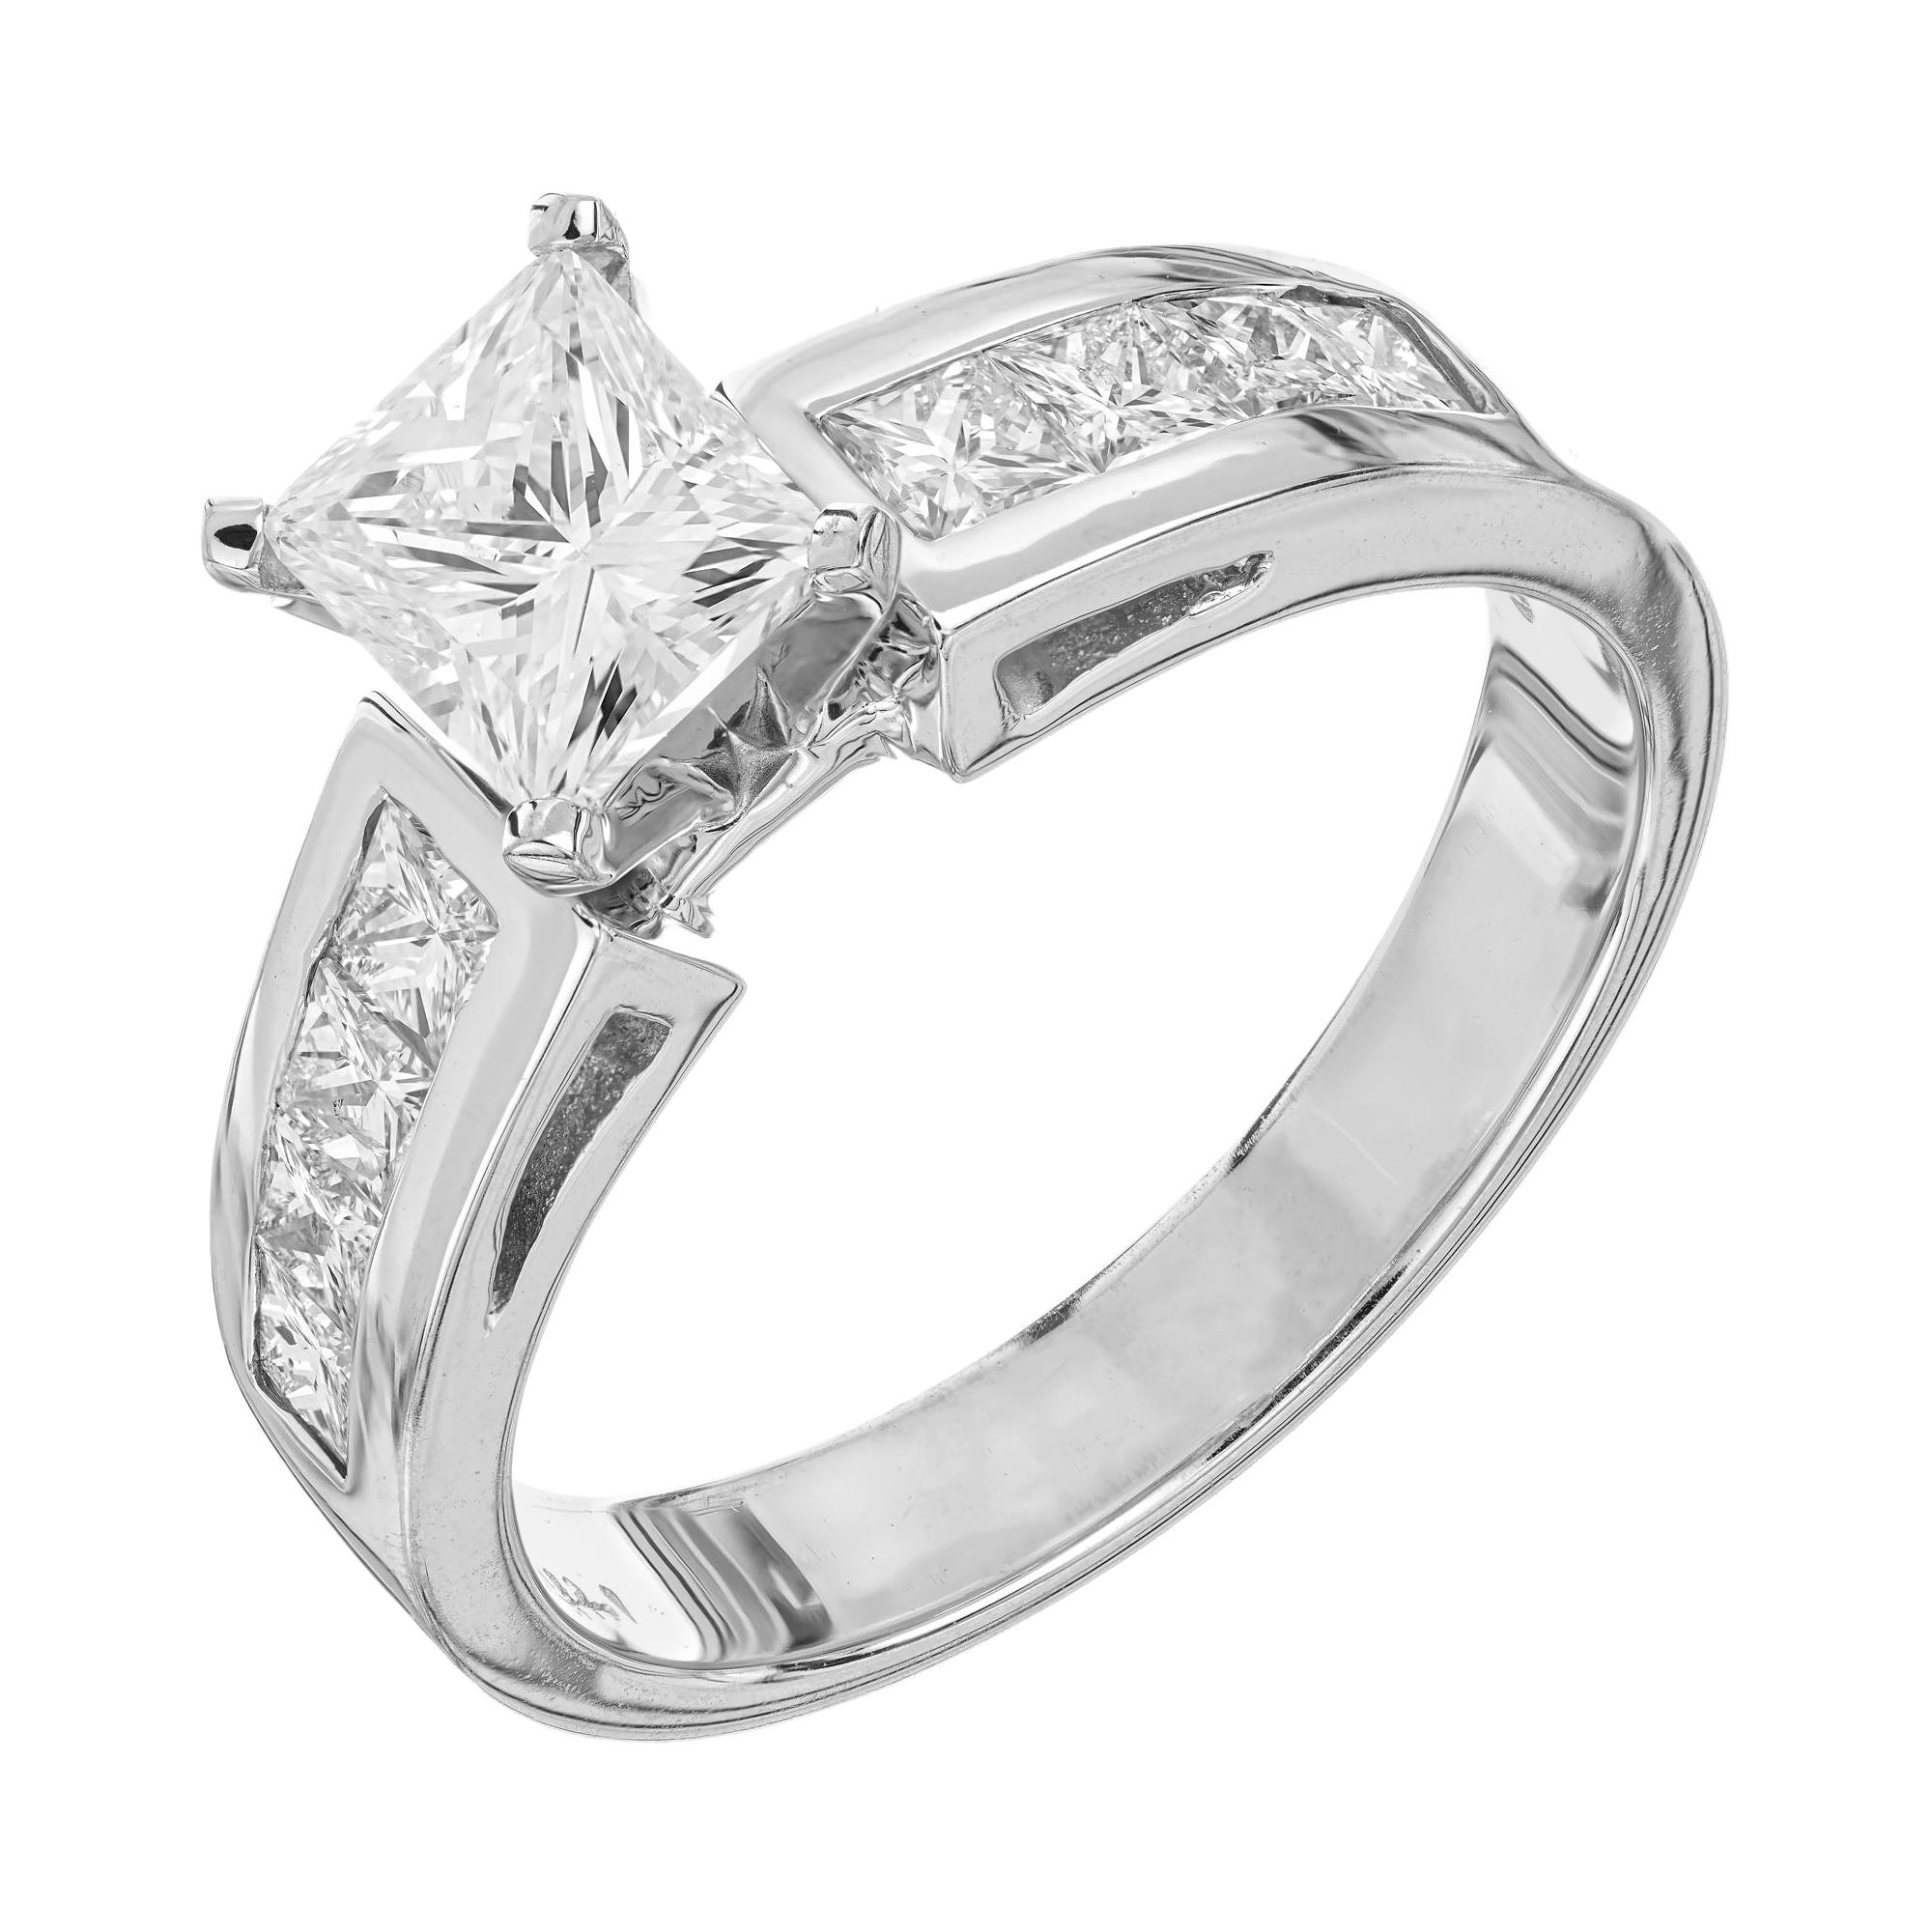 GIA Certified 1.28 Carat Diamond White Gold Engagement Ring For Sale